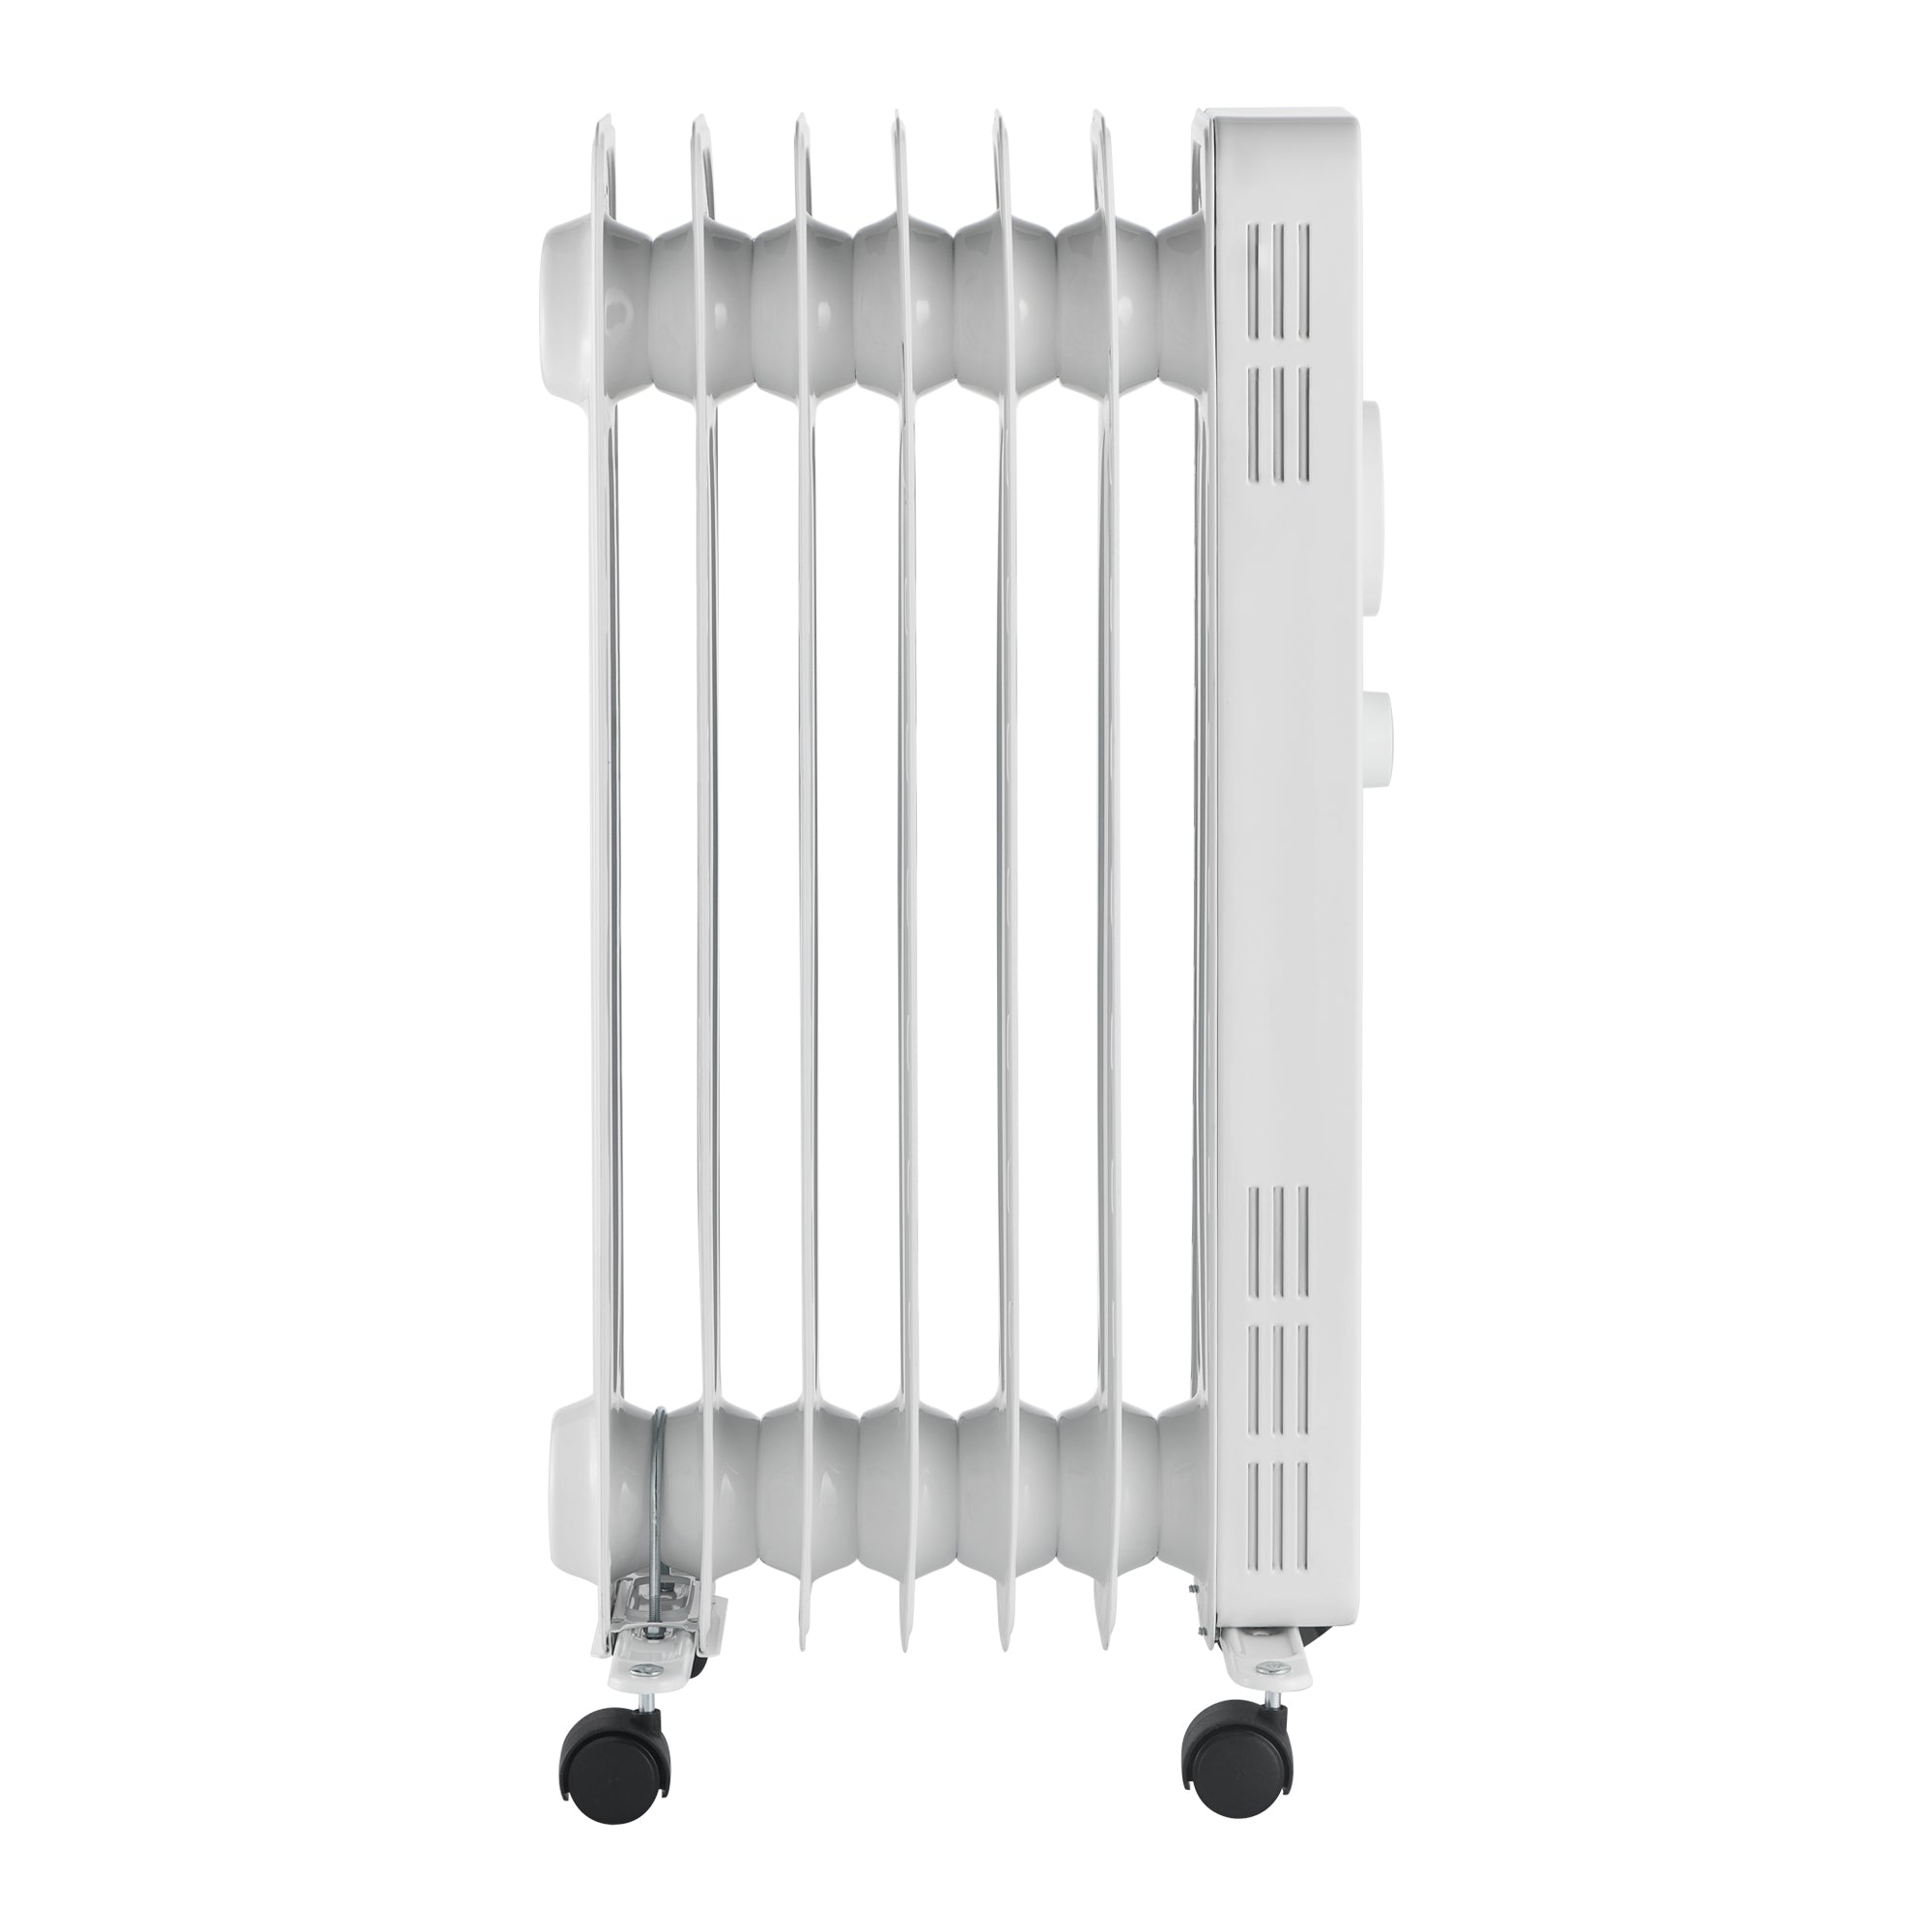 Oil Filled Radiator, 1.5kW/1500W, Overheat Protection, White